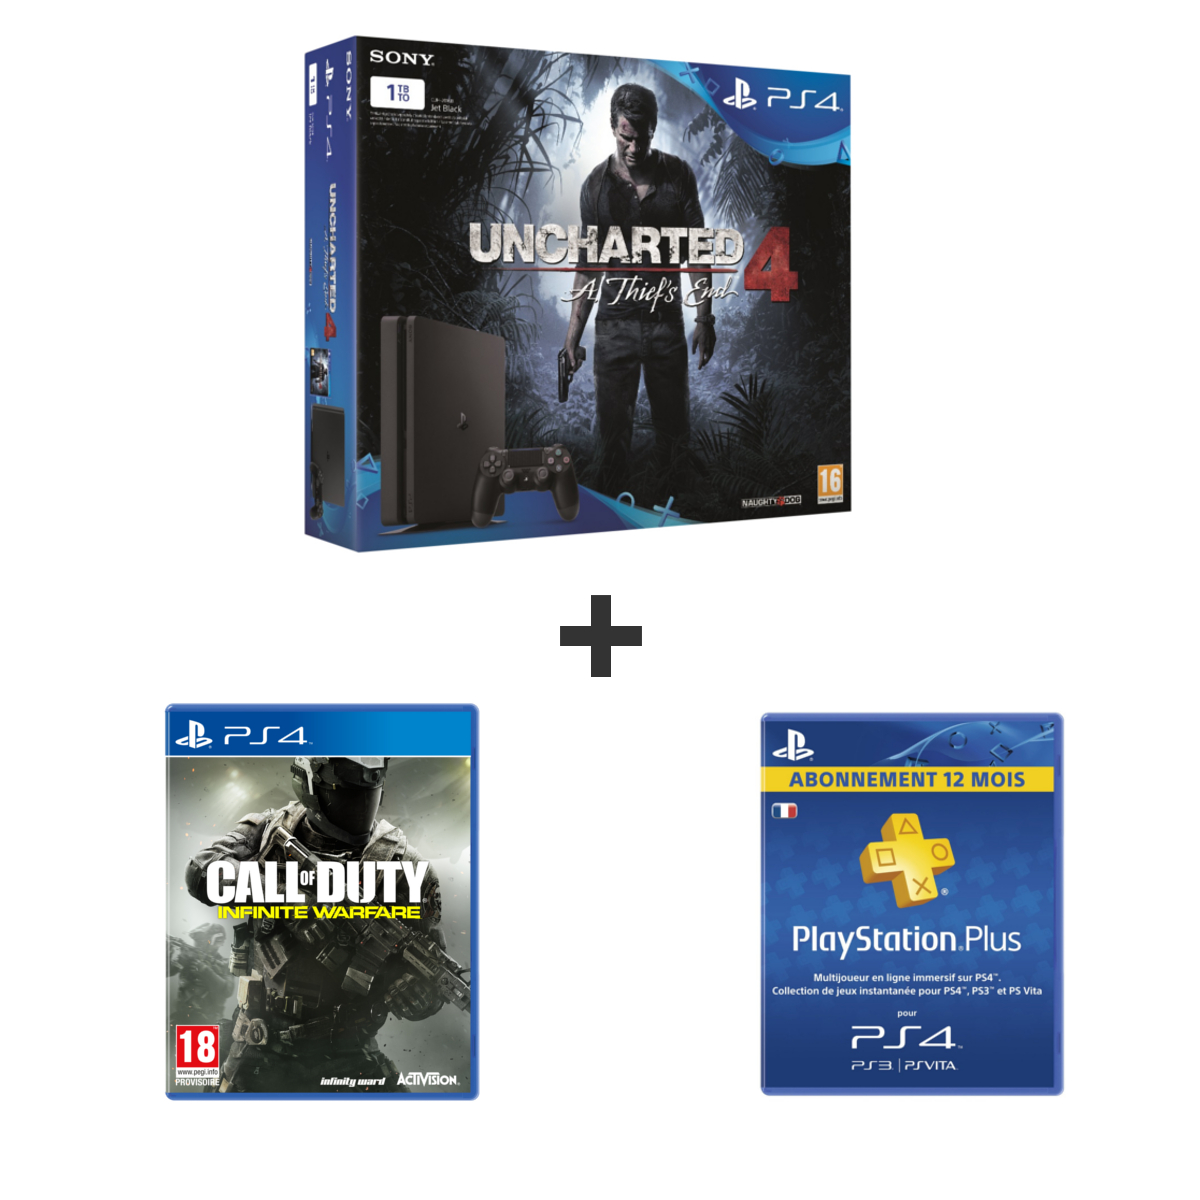 PS4 SLIM 1To UNCHARTED 4 + CALL OF DUTY : INFINITE WARAFARE + ABONNEMENT 12  MOIS PLAYSTATION PLUS pas cher 